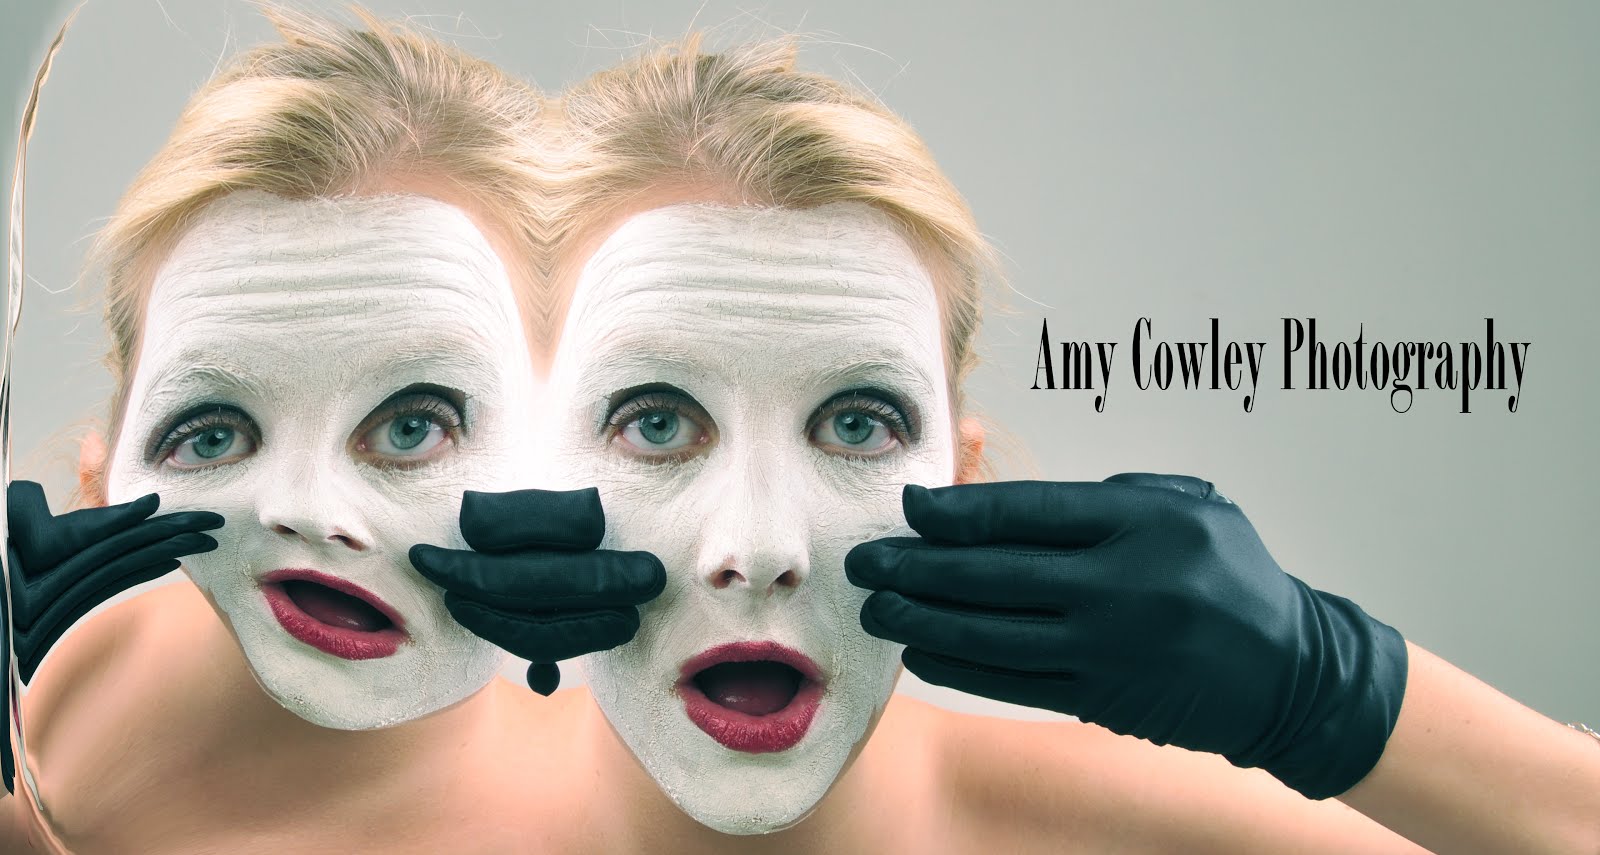 Amy Cowley Photography